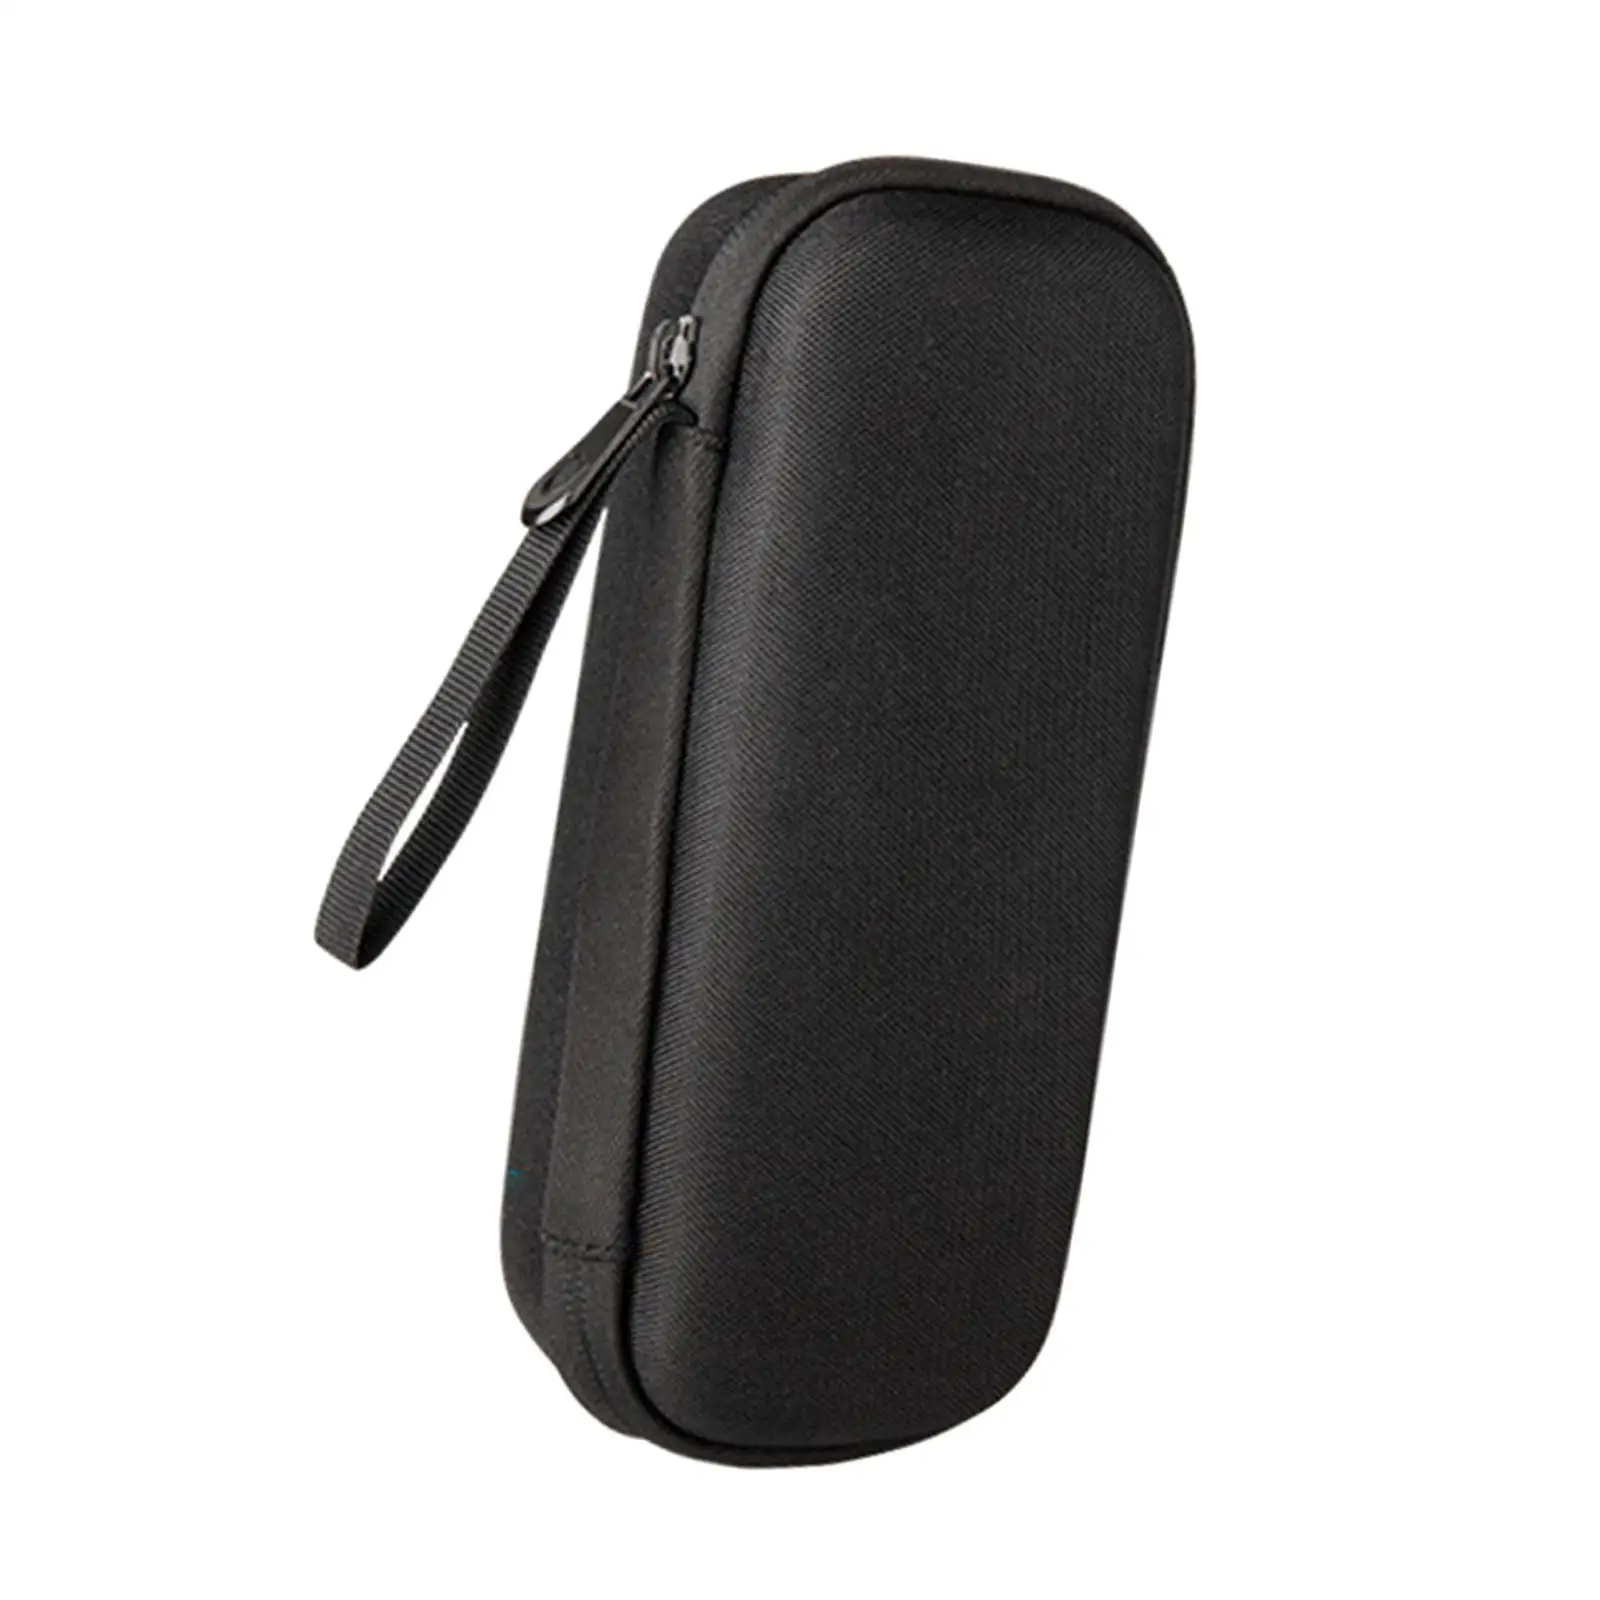 Hard Travel EVA Case Shockproof Portable Hard Shell Carrying Case for Cable Cord Electronic Accessories Charger Cell Phone